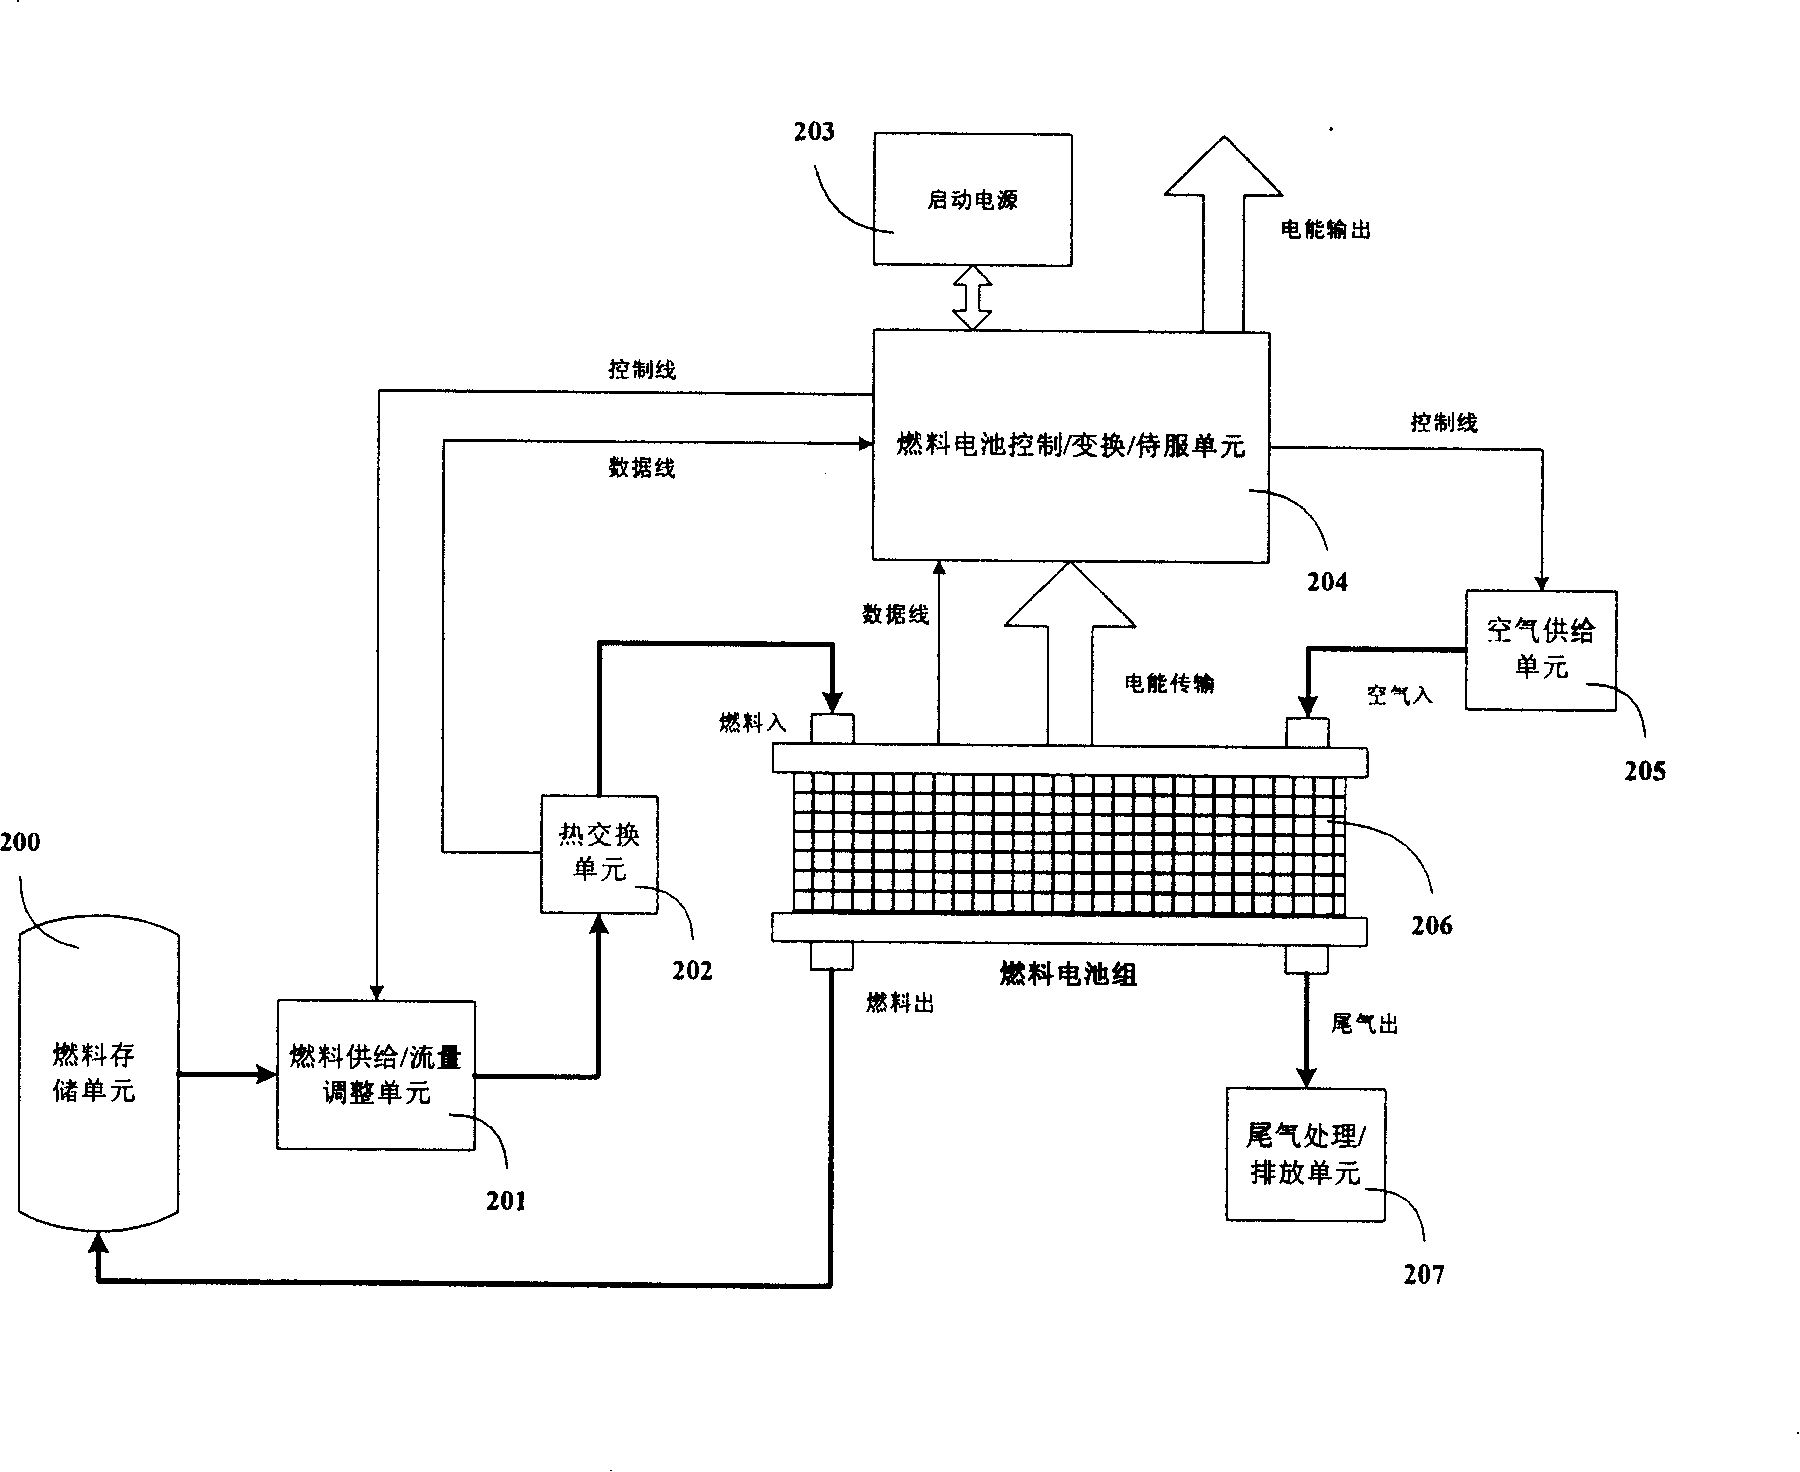 Portable apparatus fuel battery system and its operation method